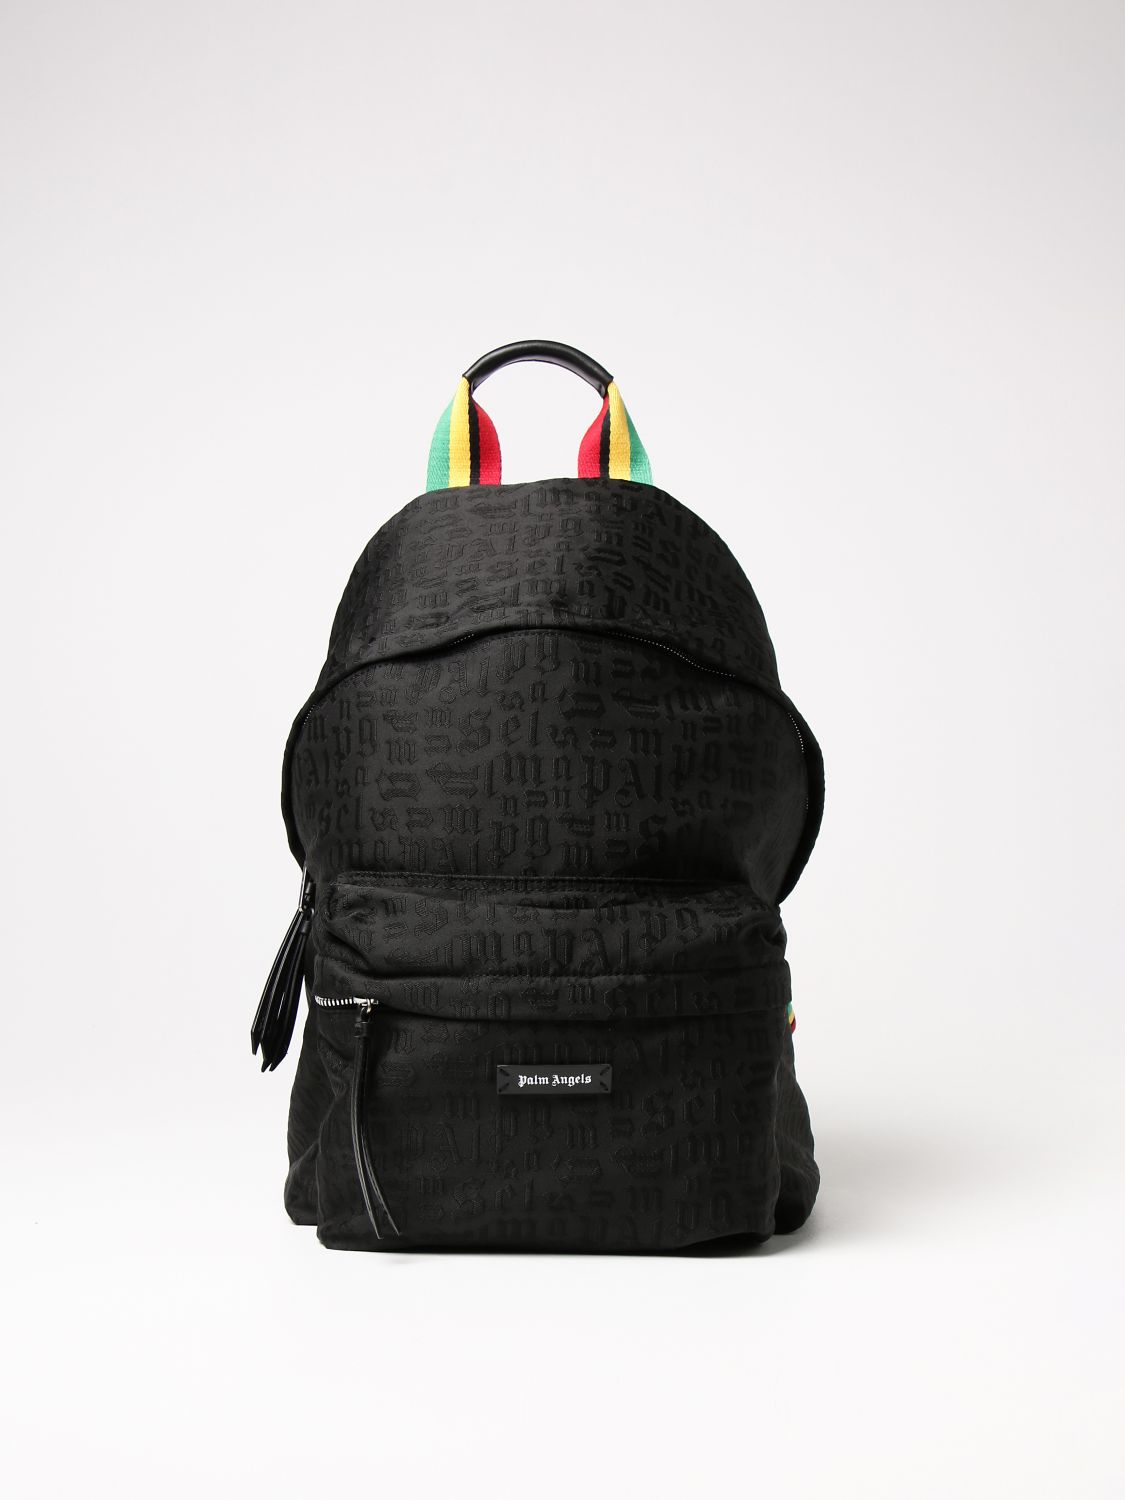 PALM backpack in logoed canvas - | Palm Angels backpack PMNB012S21FAB005 online on GIGLIO.COM